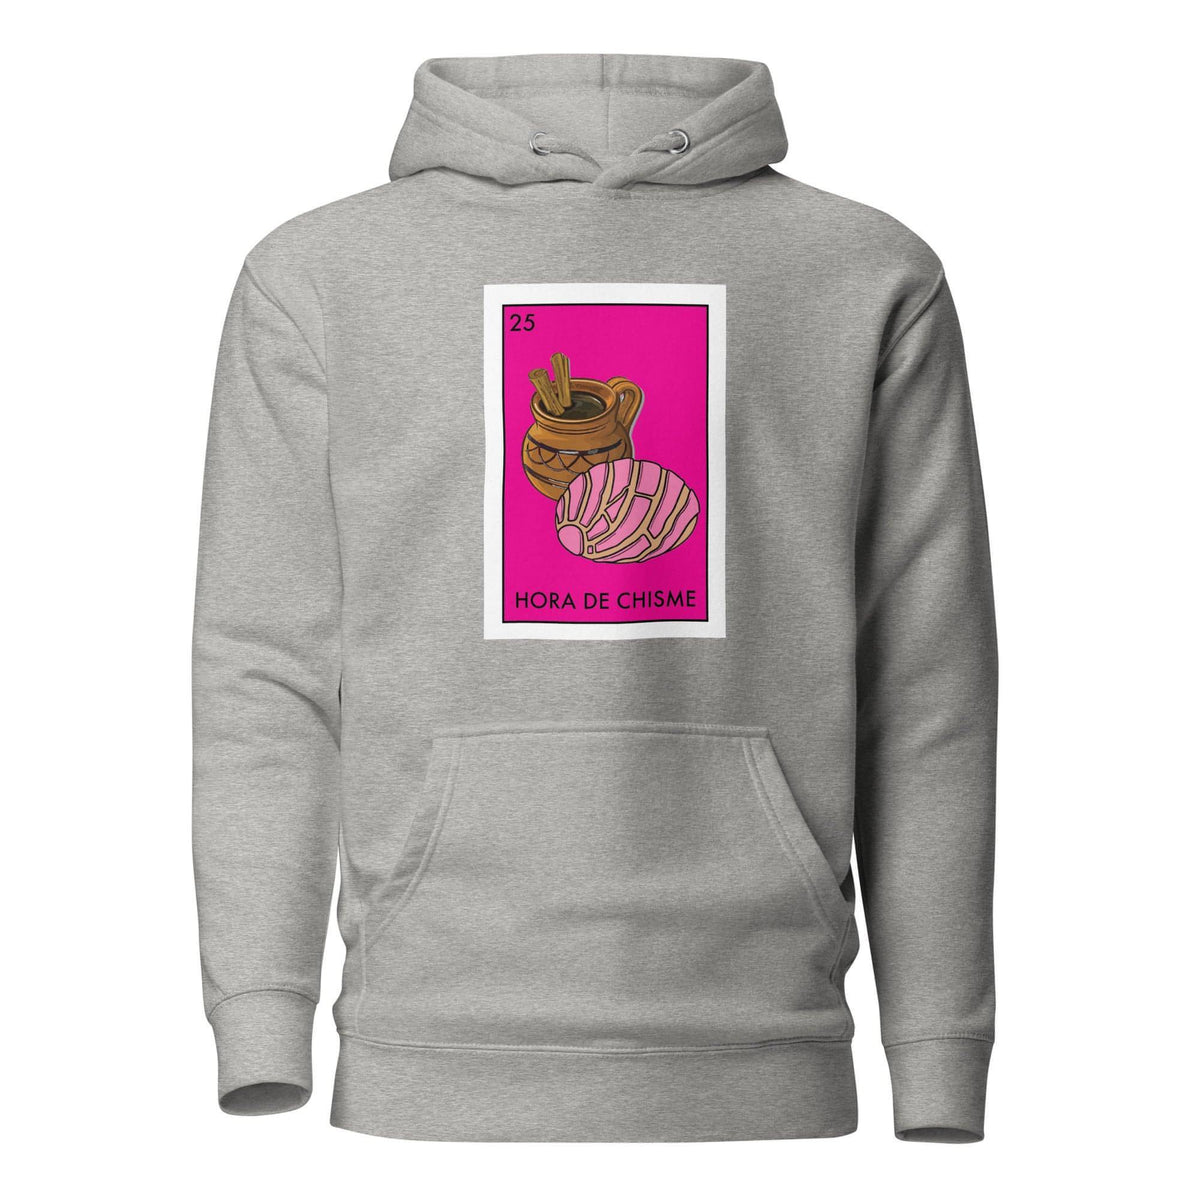 Chisme Loteria Hoodie (Time for Gossip)